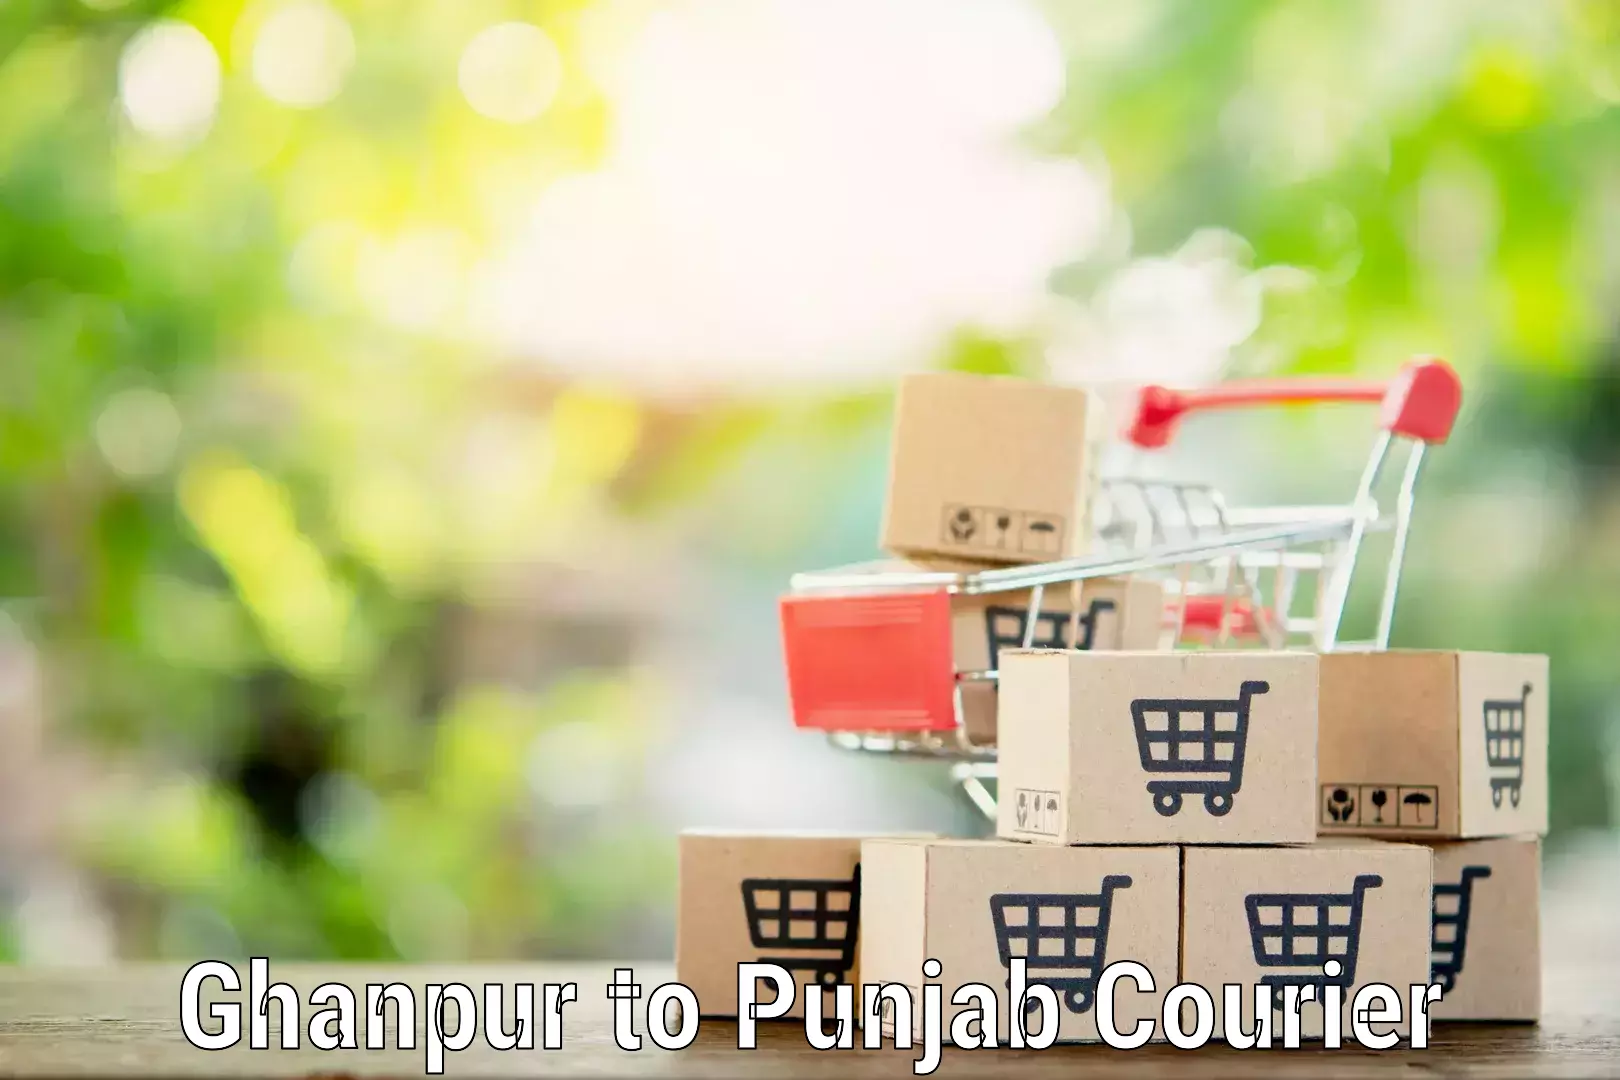 Furniture delivery service Ghanpur to Batala